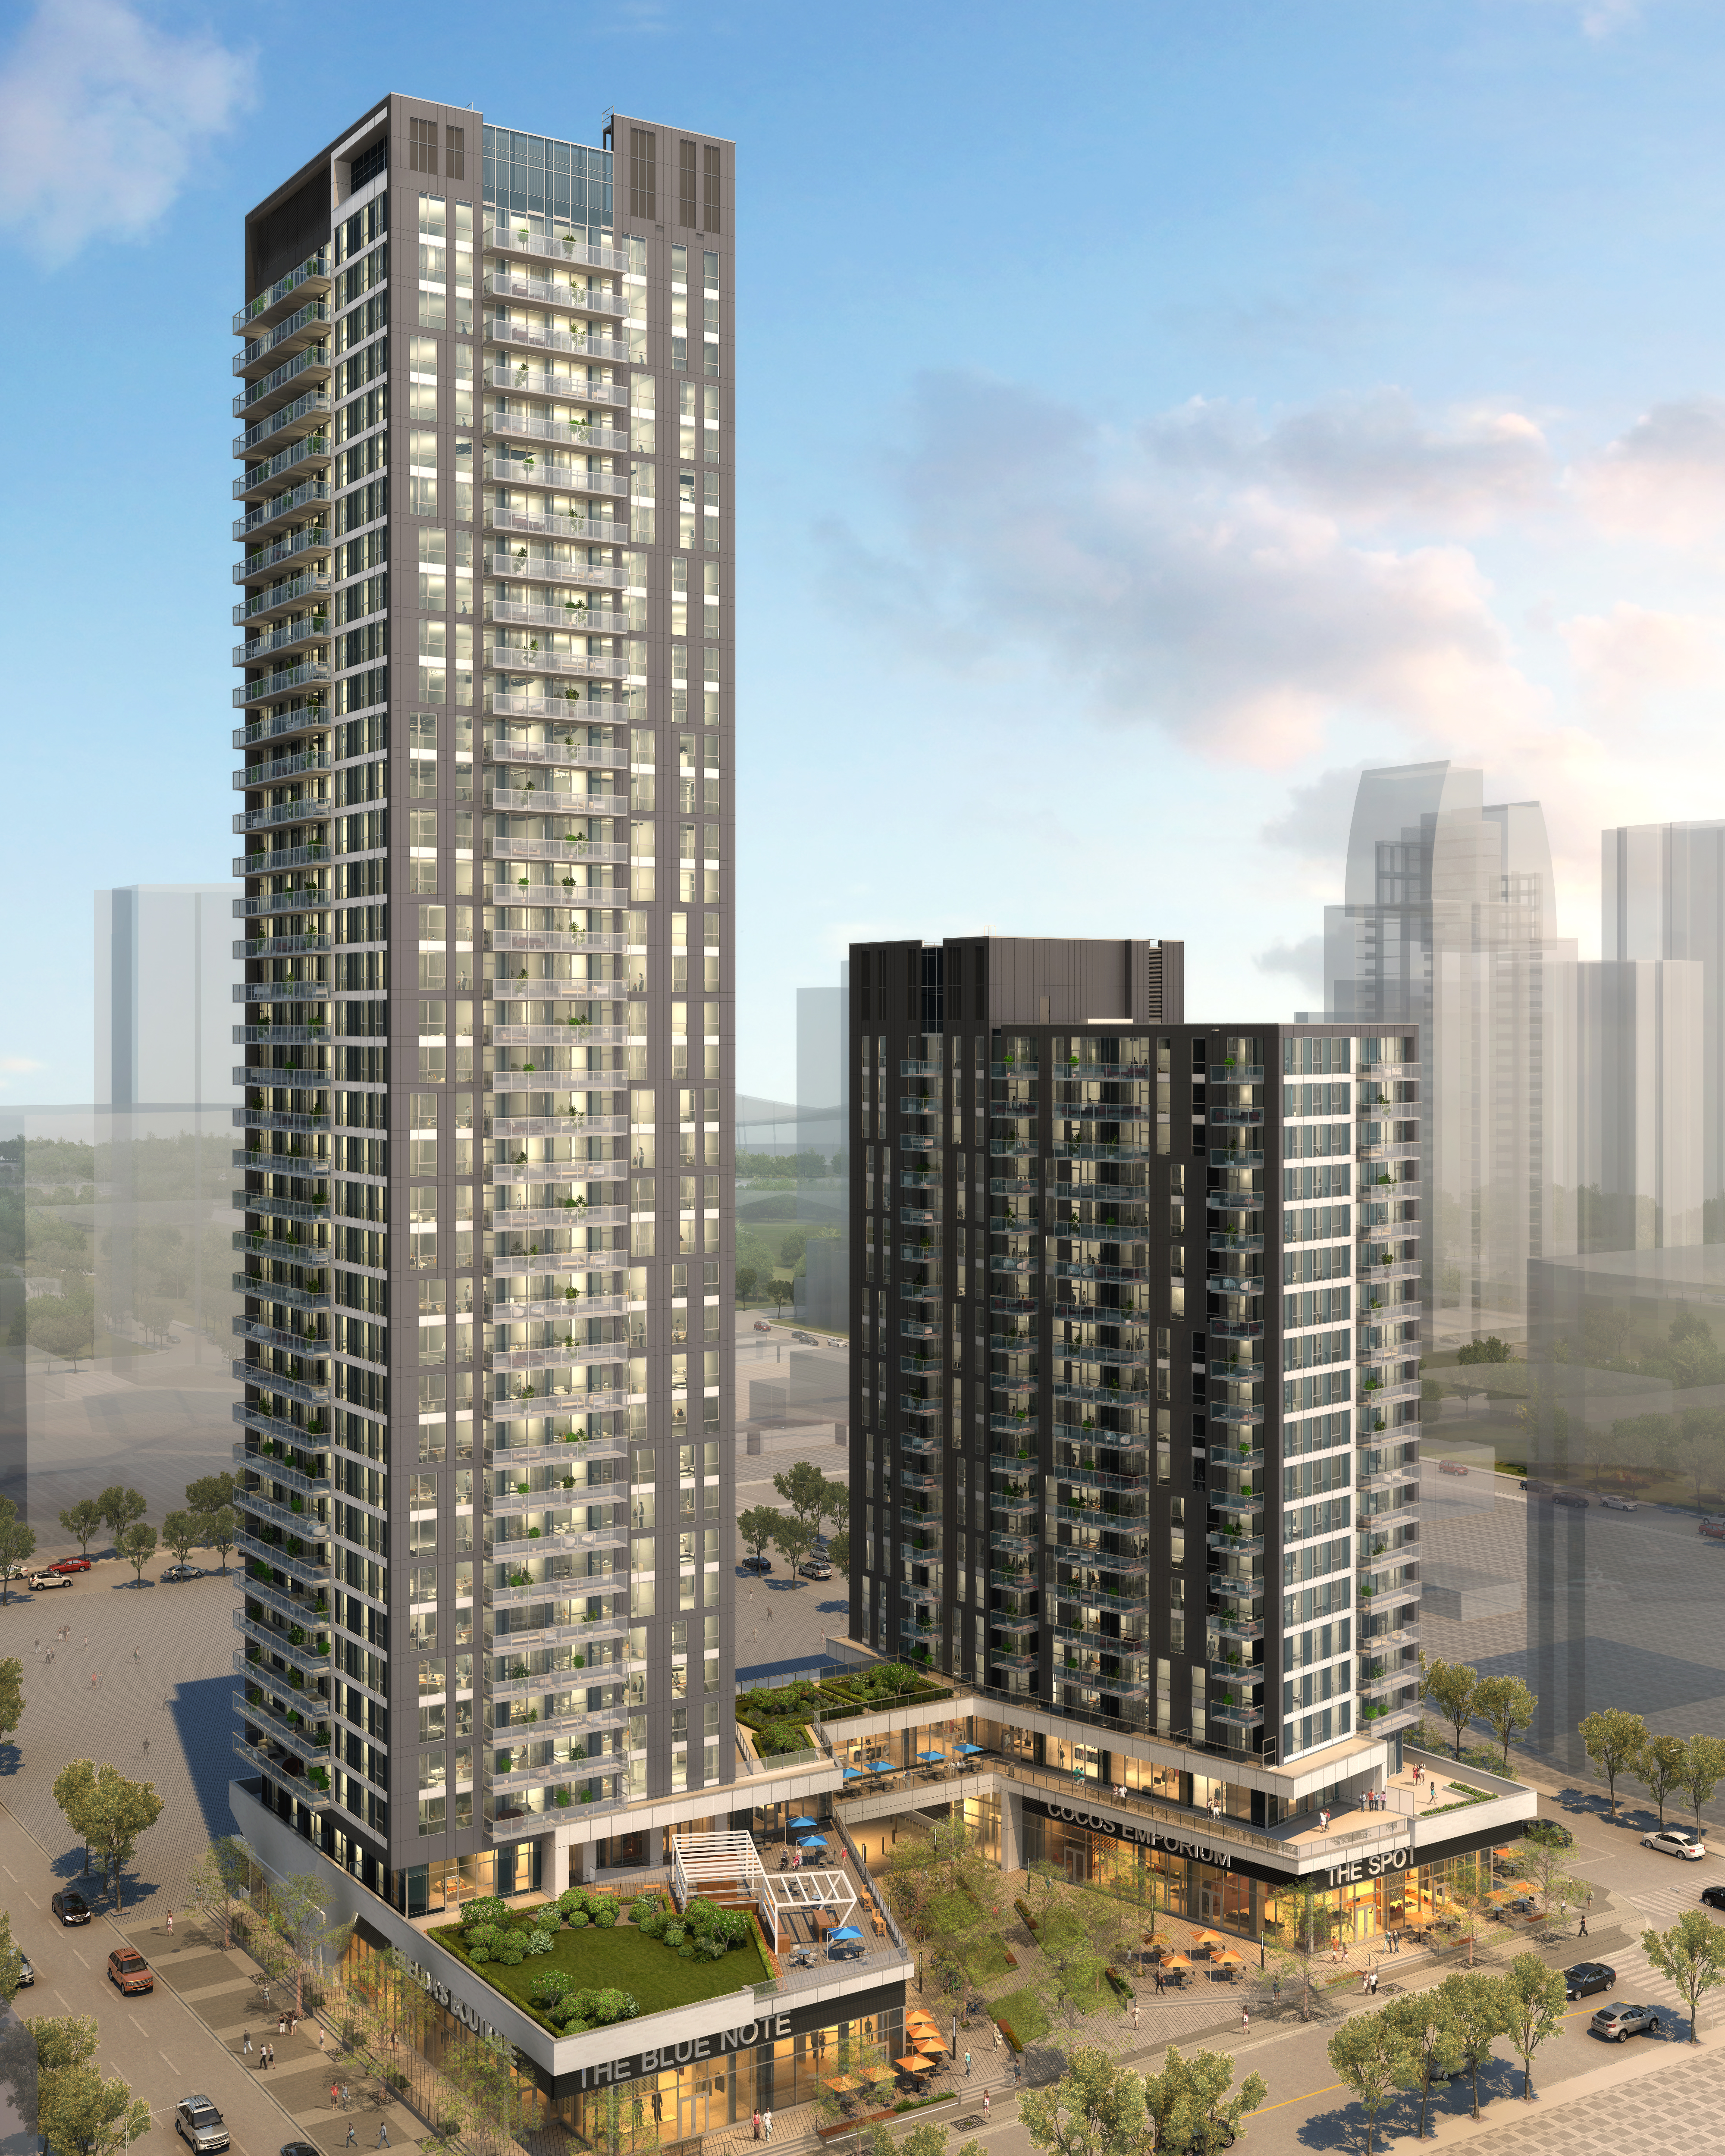 Beltline Condos located at 103 11 Avenue Southeast, Calgary, AB image